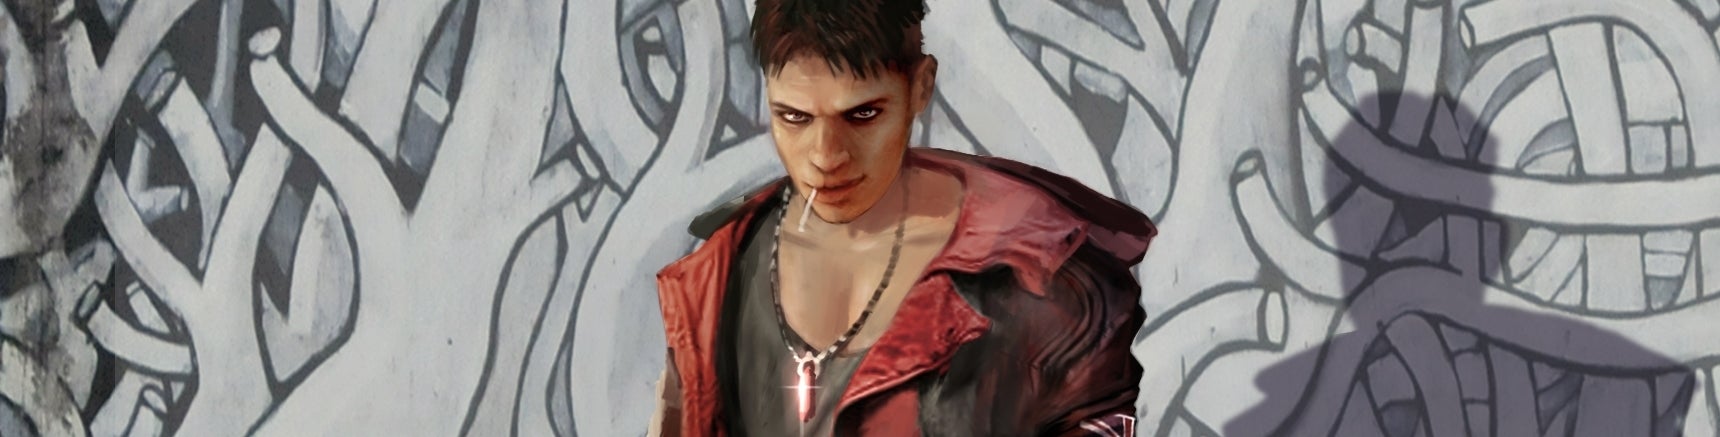 Image for DmC Devil May Cry review